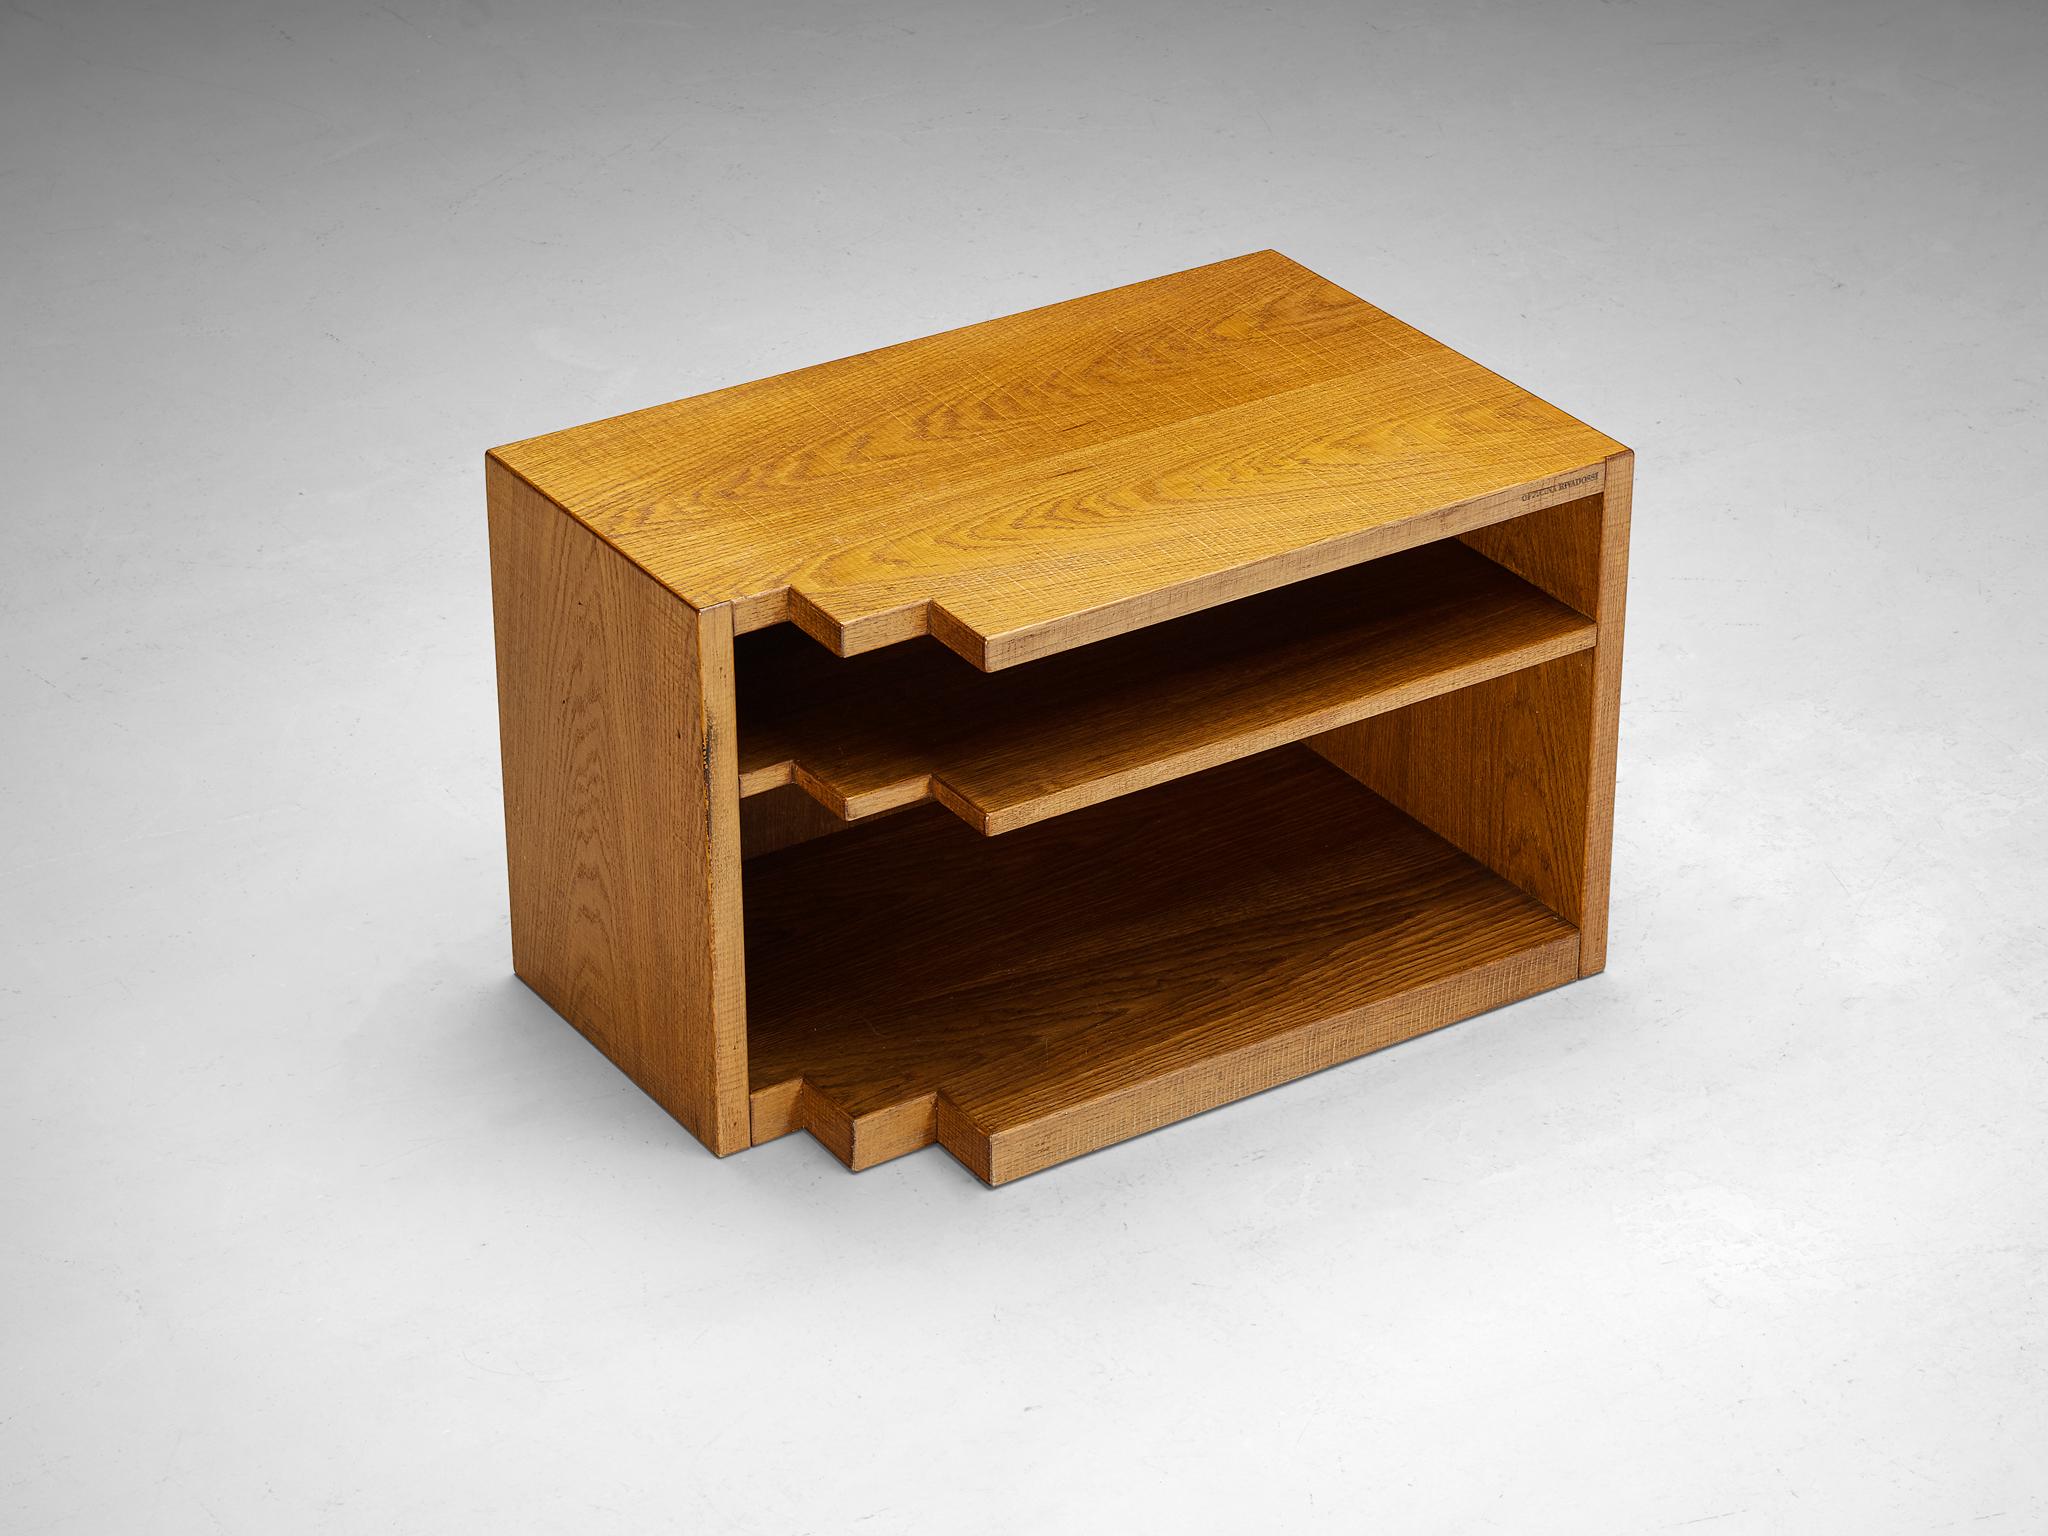 Giuseppe Rivadossi, side table, oak, Italy, 1970s

This delightful side table, designed by Italian sculptor and artisan Giuseppe Rivadossi, is a good example of woodworking artistry. Its striking design features a distinctive touch: on one side of